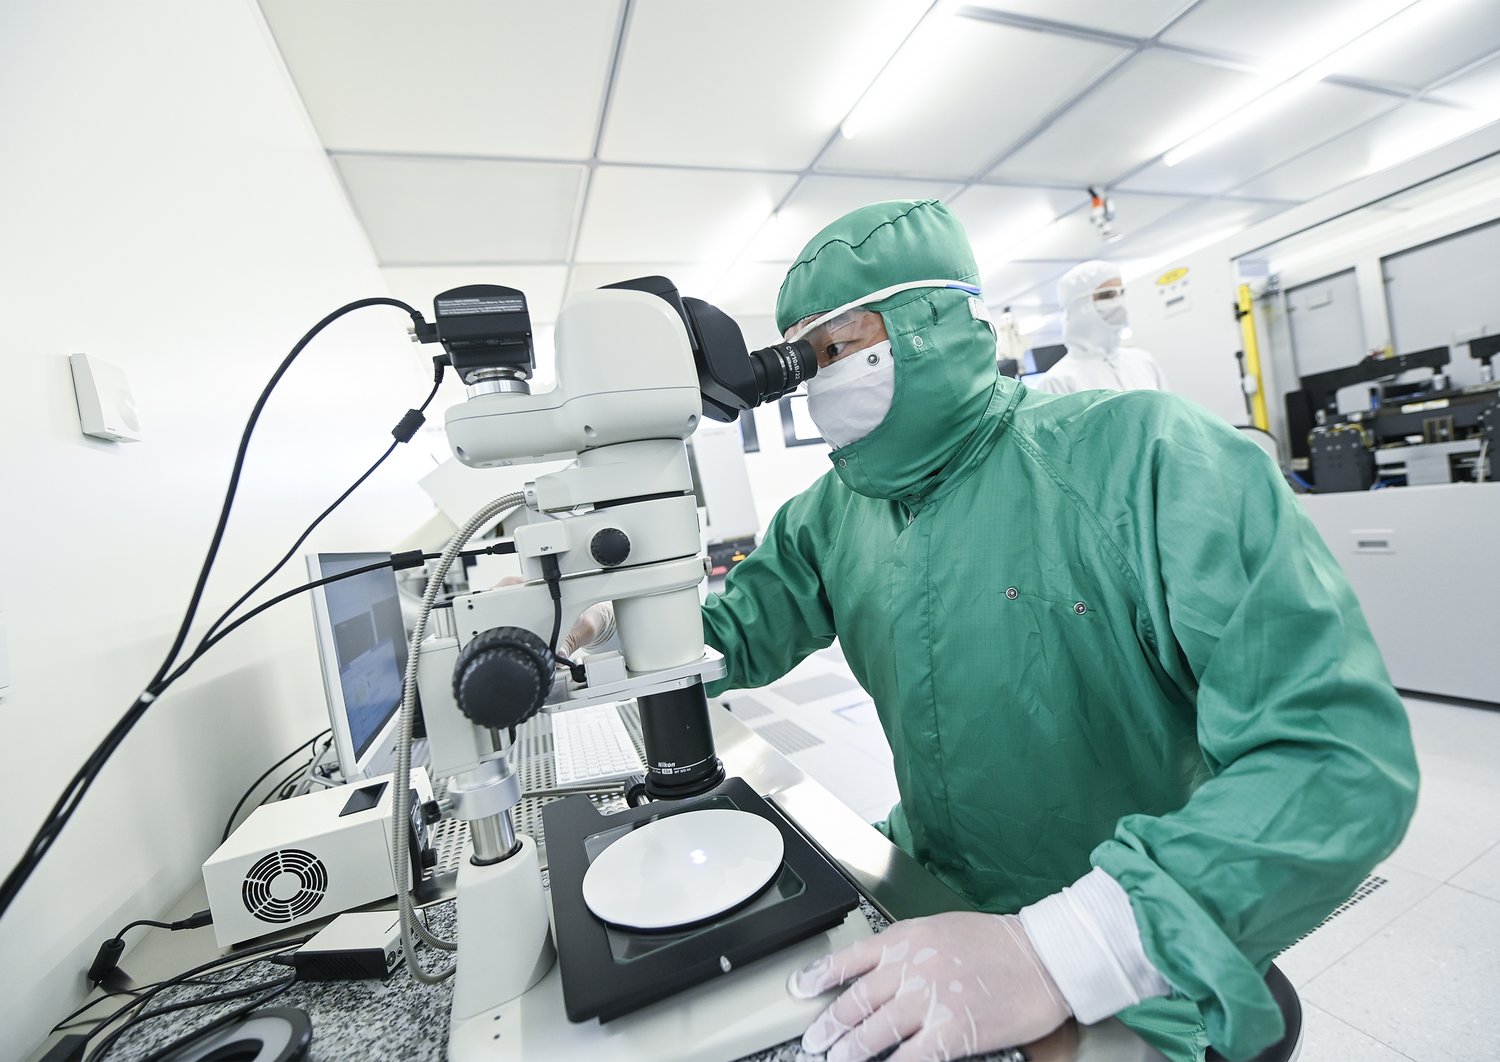 A researcher looking through a microscope in the clean room